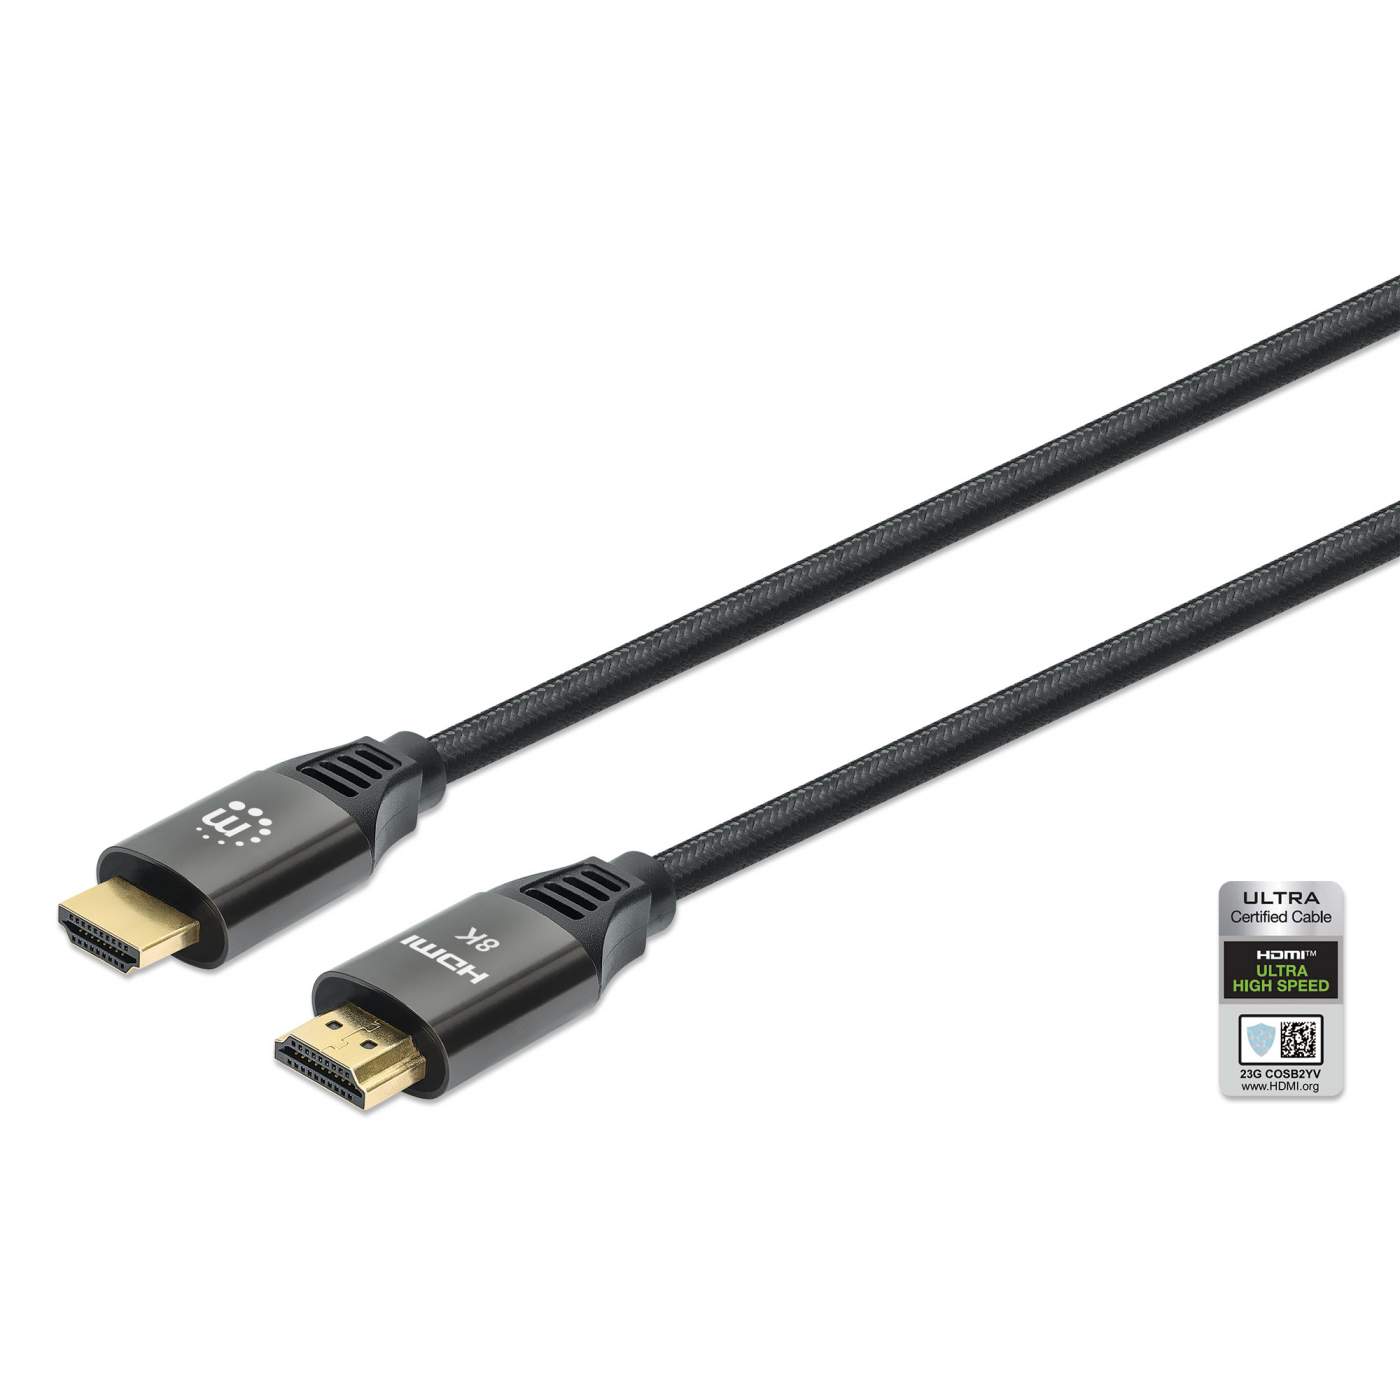 Nixeus Ultra High Speed HDMI Certified Cable – Certified by HDMI